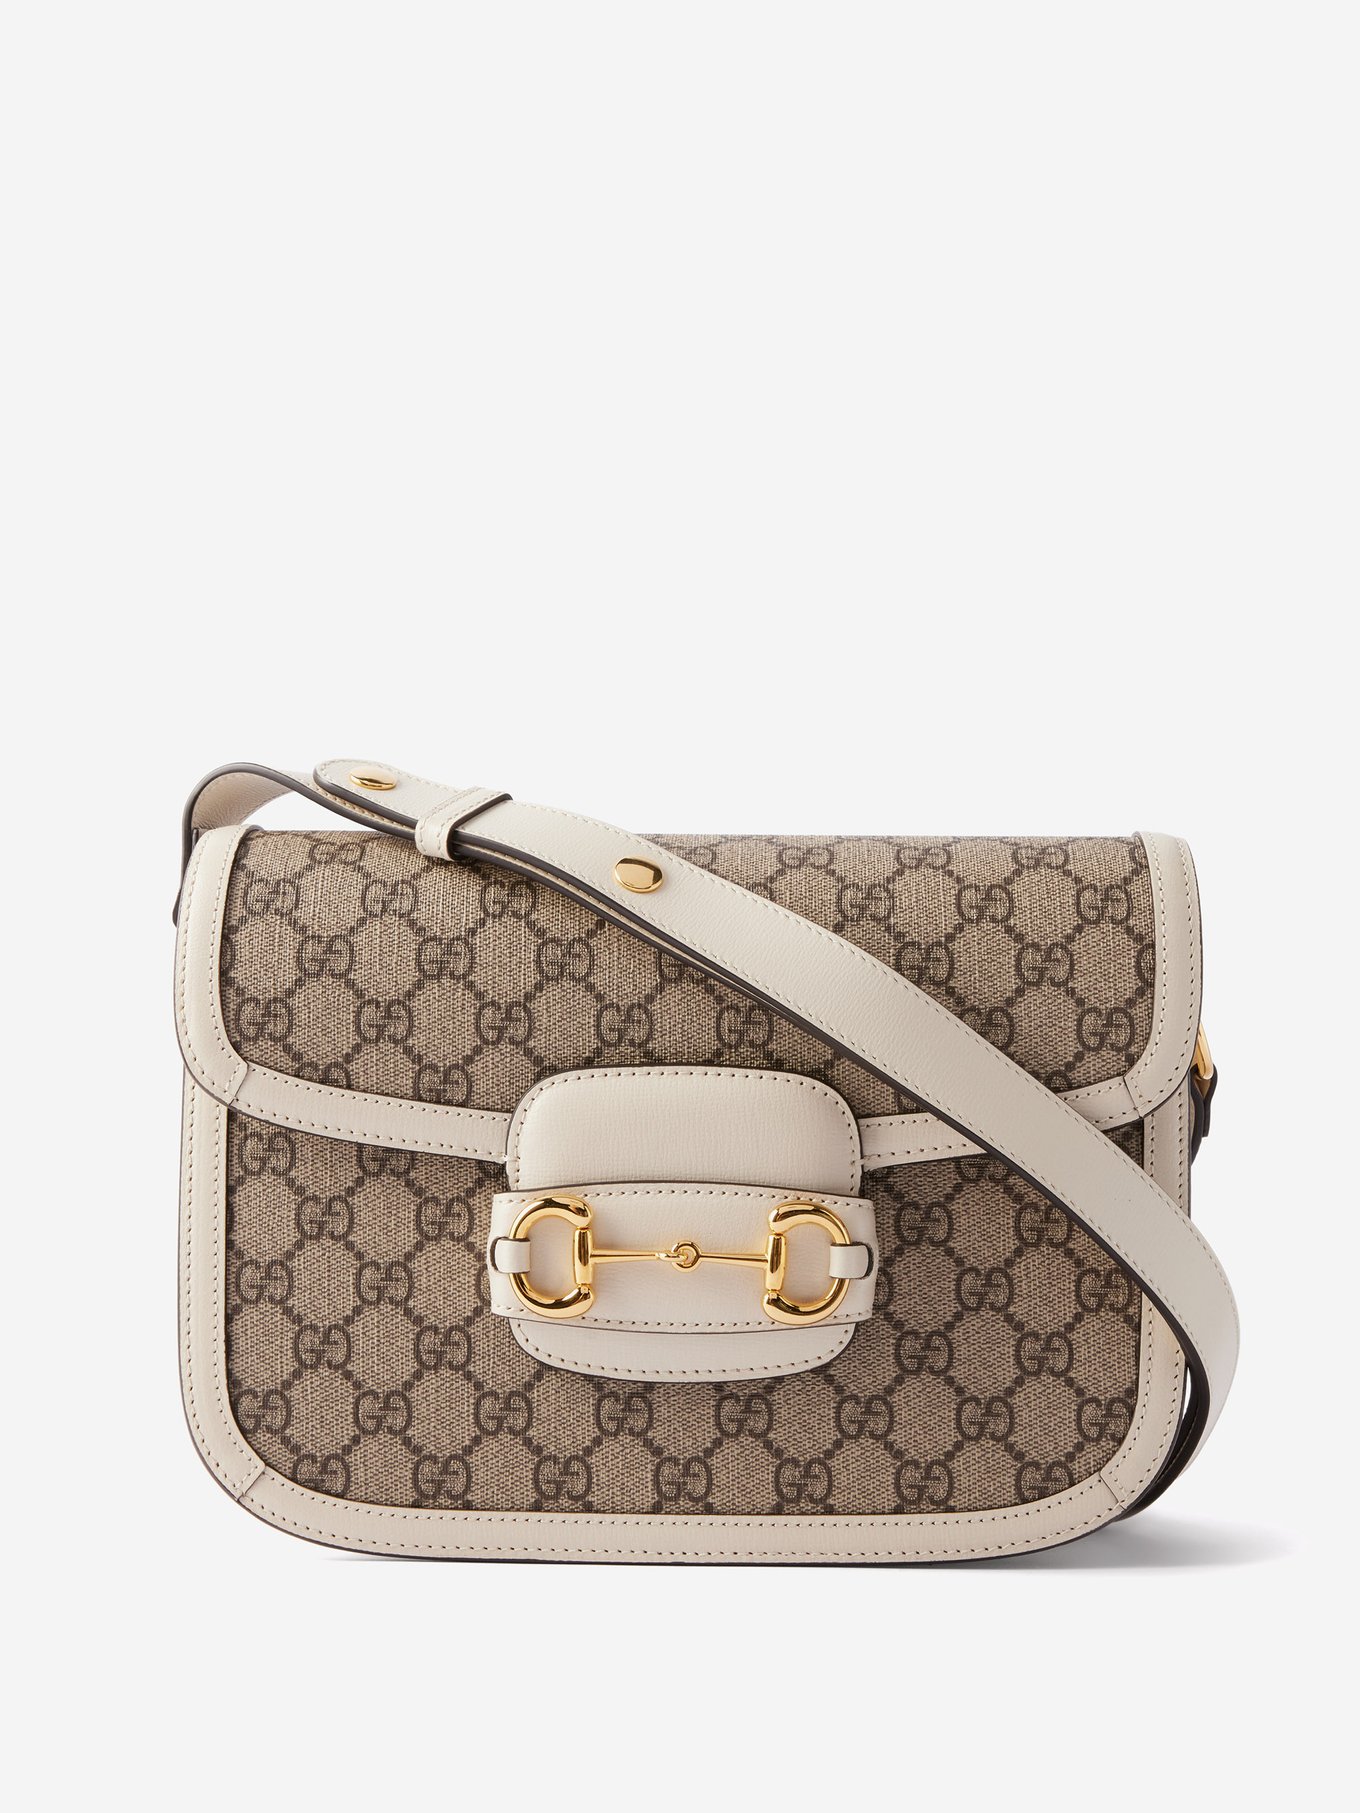 GUCCI Horsebit 1955 small leather-trimmed printed coated-canvas shoulder  bag